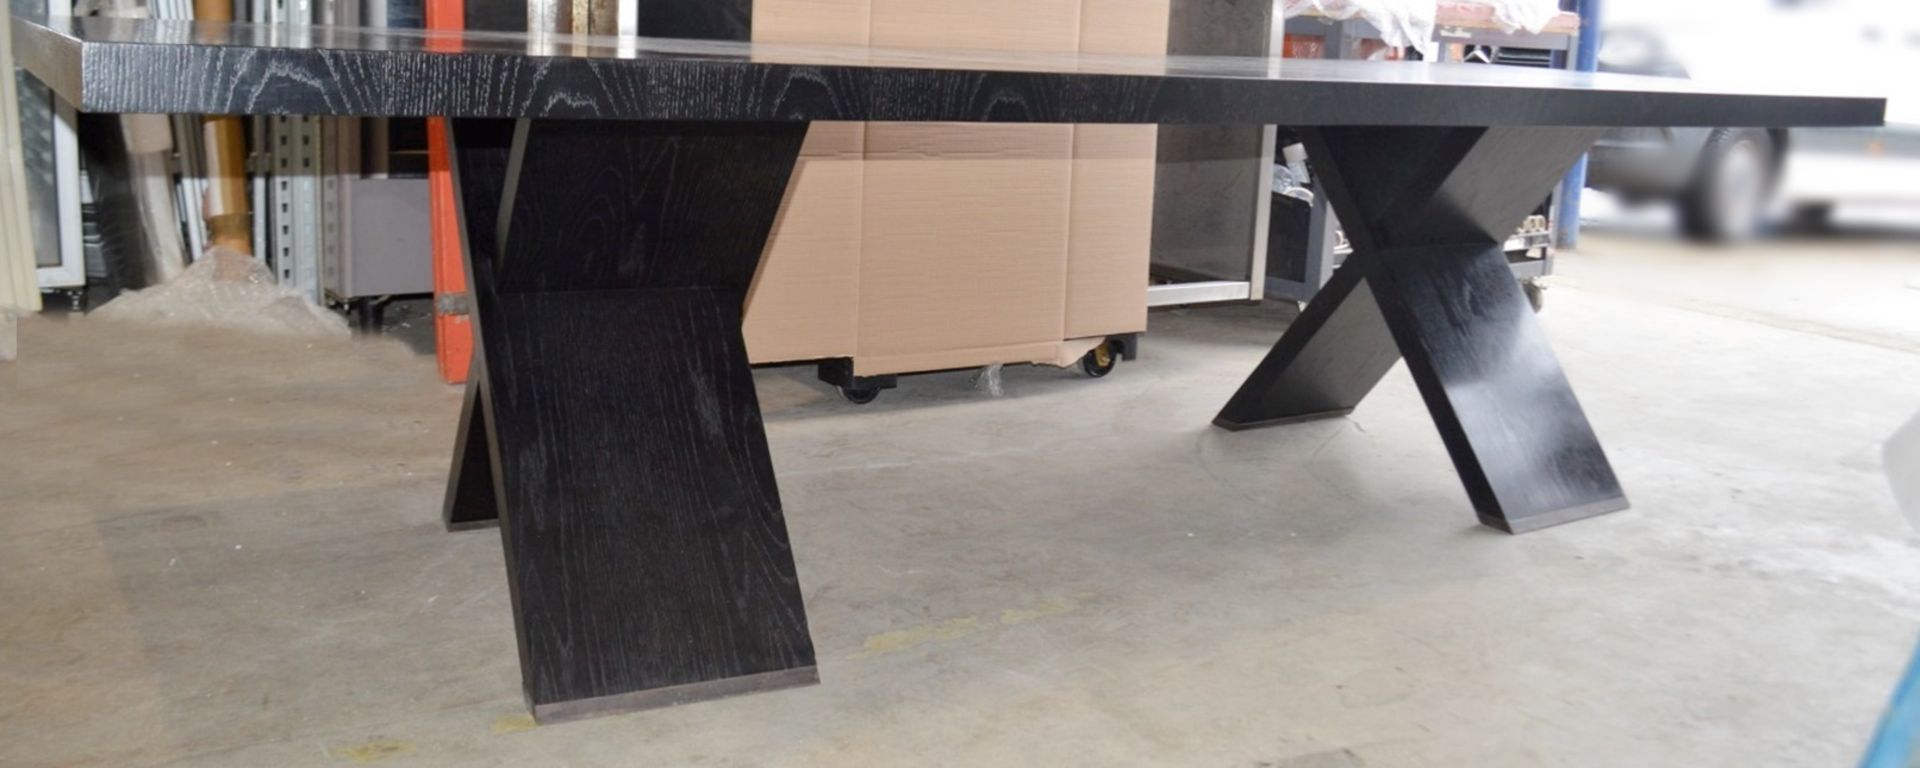 1 x Large 3-Metre Wooden Dining Table With Cross Legs In A Near Black Finish - From An Exclusive - Image 4 of 12